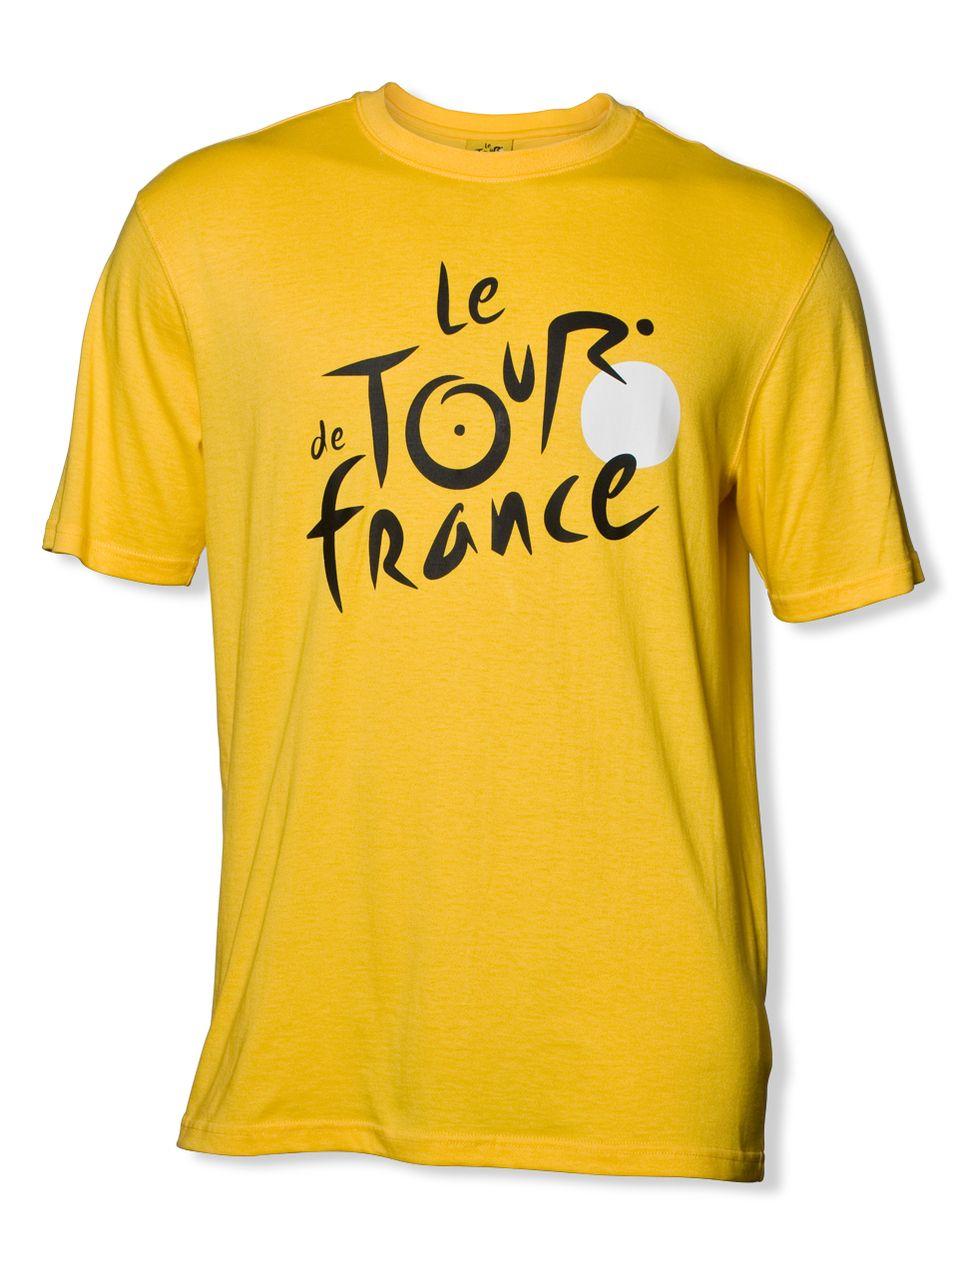 Le Tour De France Logo - Le Tour De France Logo T Shirt In Yellow. Adult Sizes. Cycle Wear